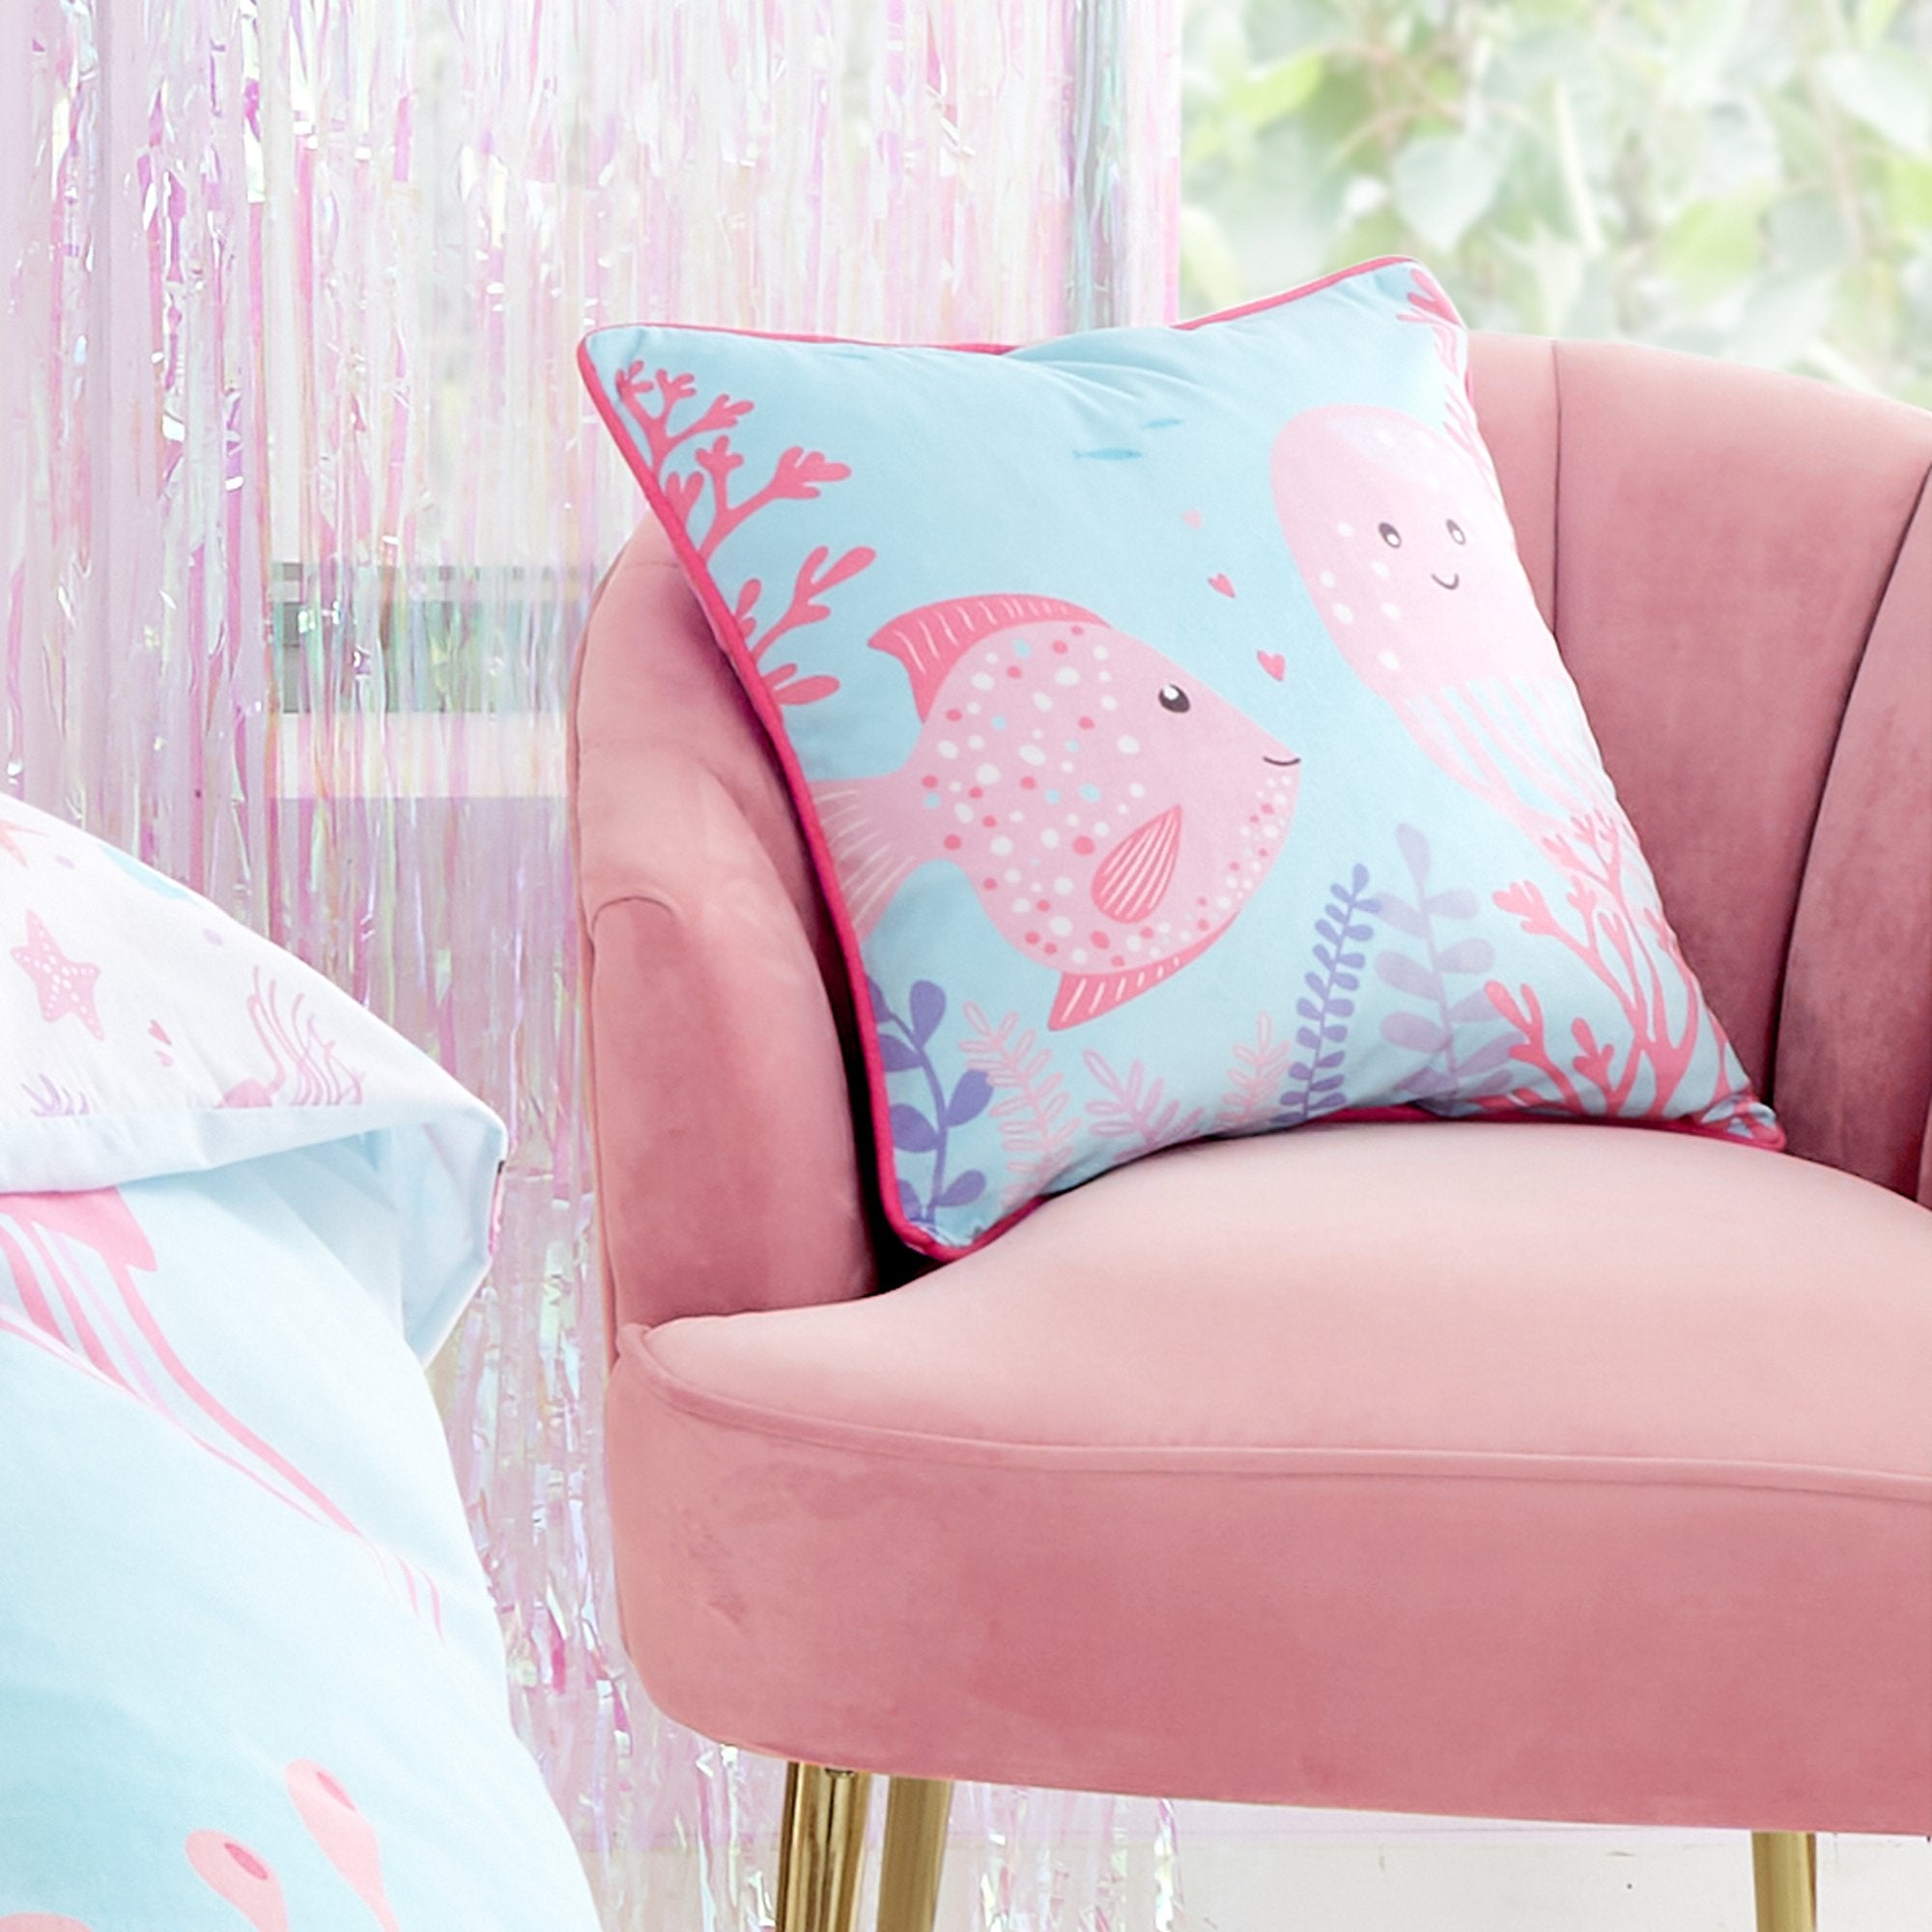 Cushion Mermaid Vibes by Bedlam in Pink